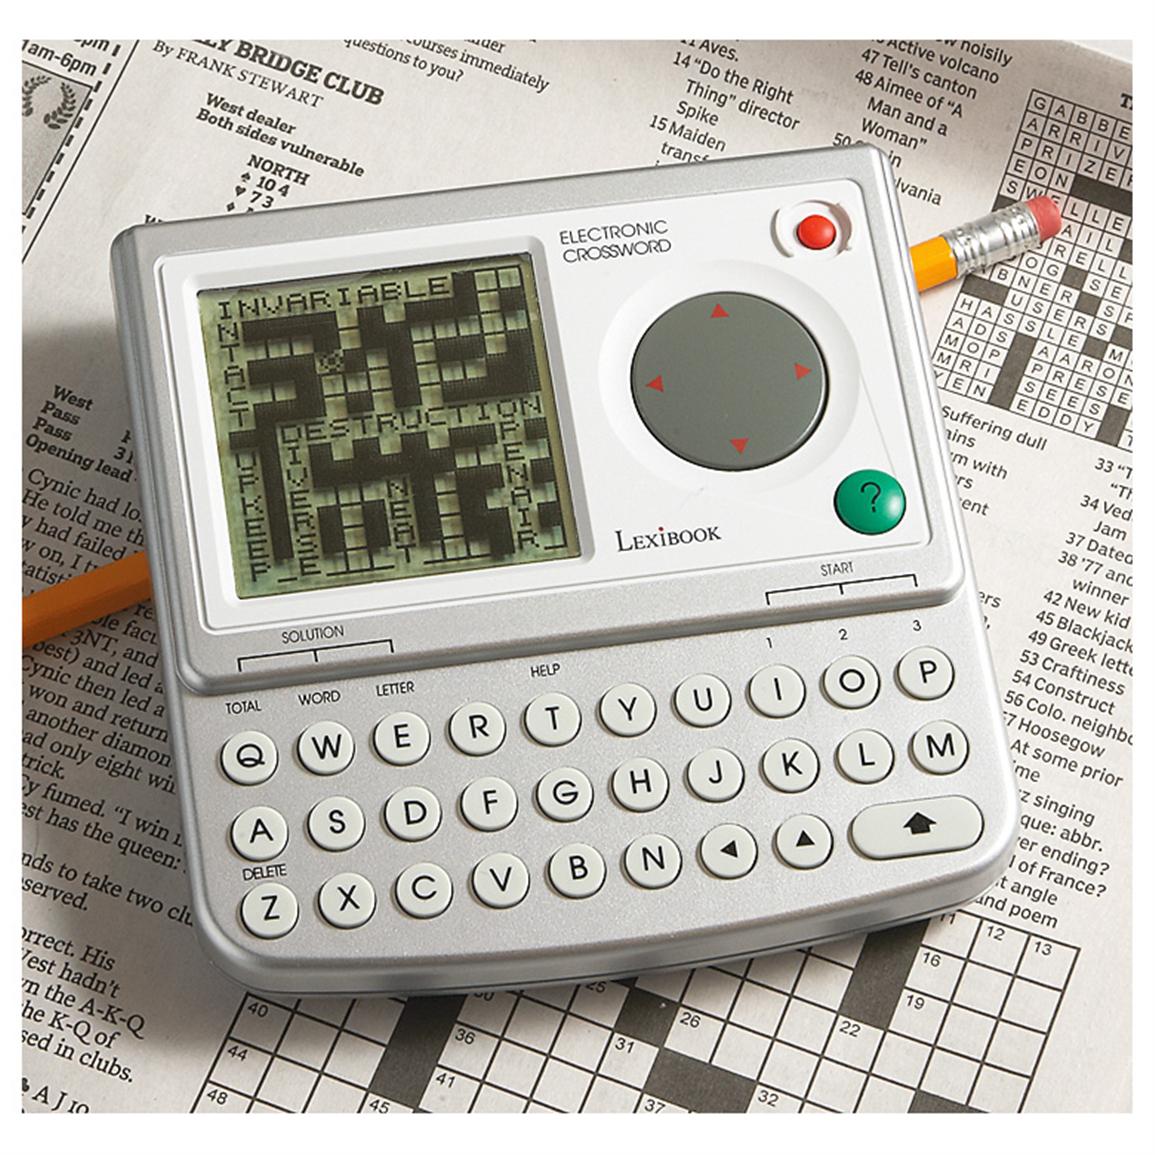 Electronic Crossword Game 226200 Puzzles Games at Sportsman #39 s Guide